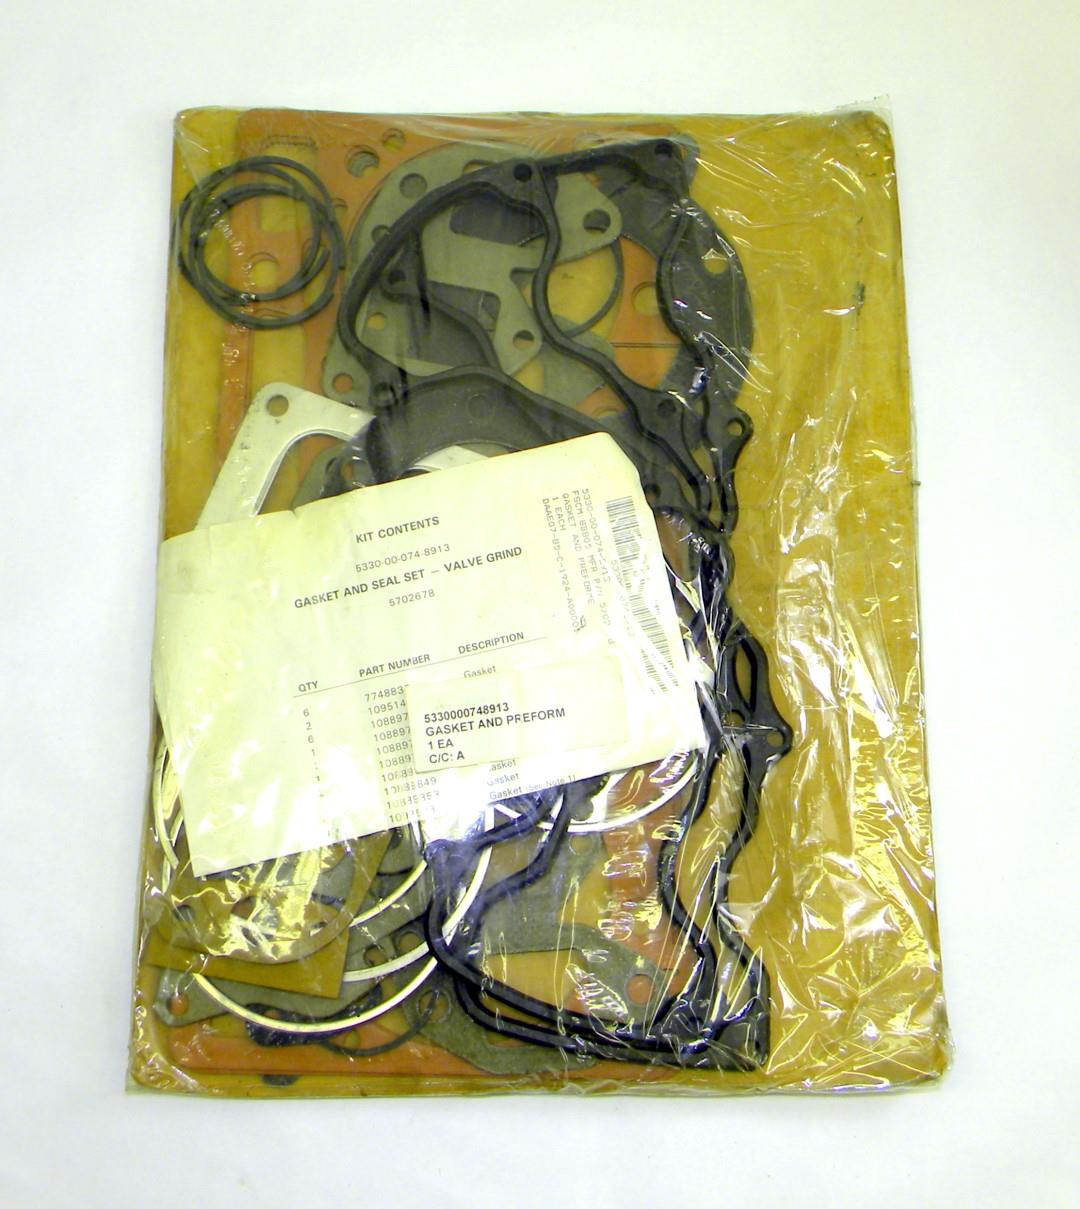 M35-649 | 5330-00-074-8913 Multi-Fuel Head Gasket Set for M35A2 Series and M54 Series NOS (5).JPG